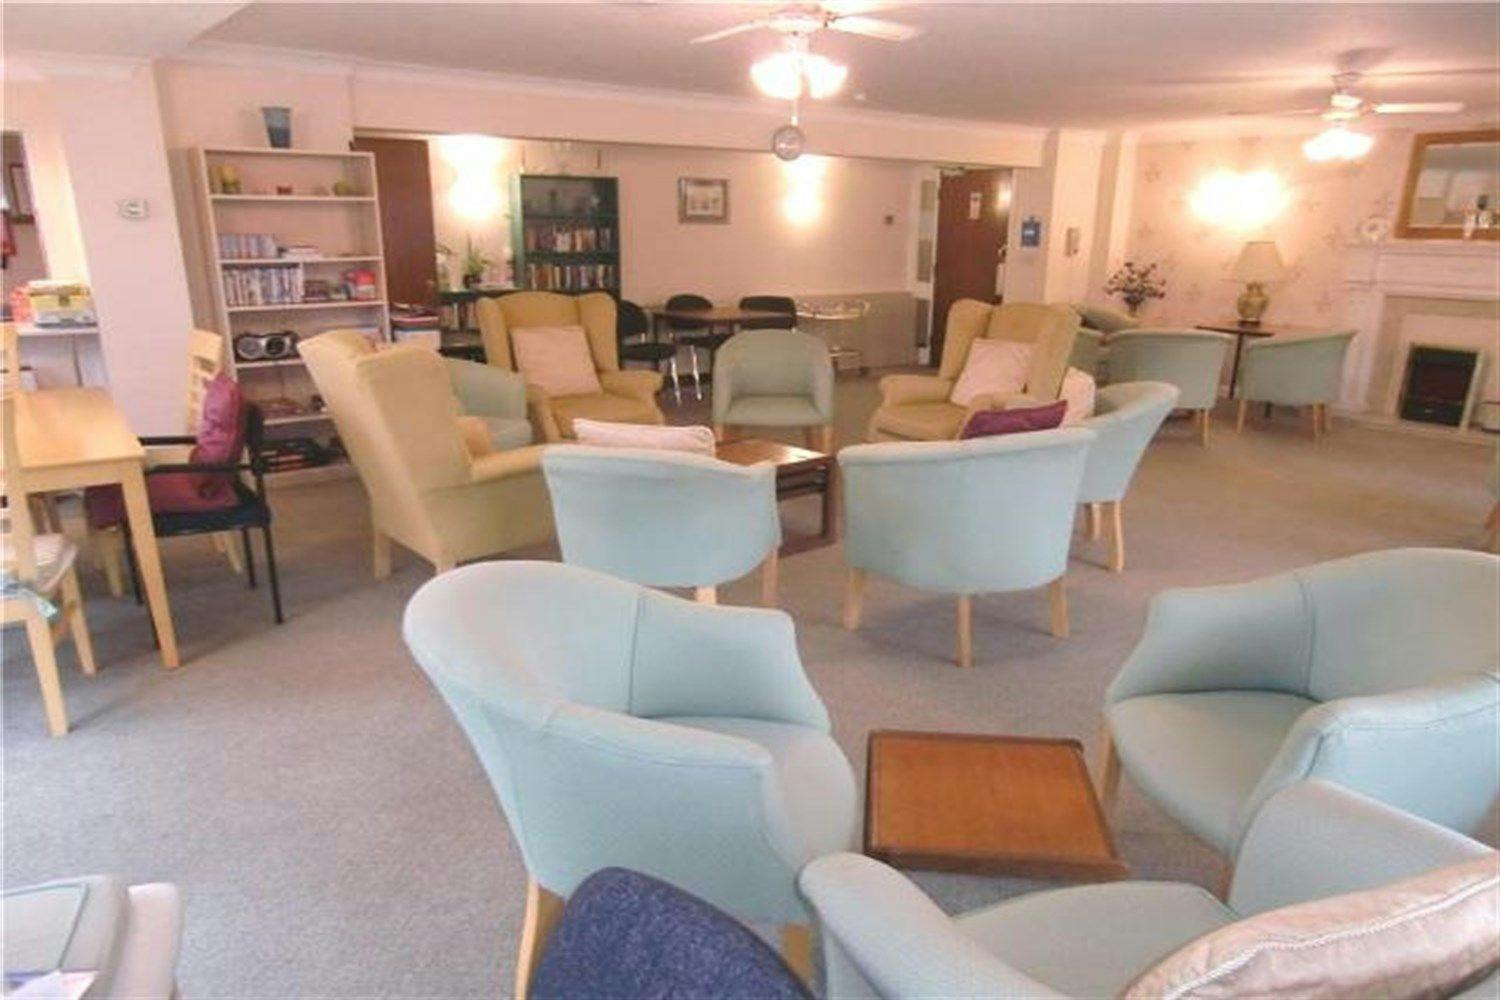 Communal Lounge at Homeforth House Retirement Development in Gosforth, Newcastle upon Tyne